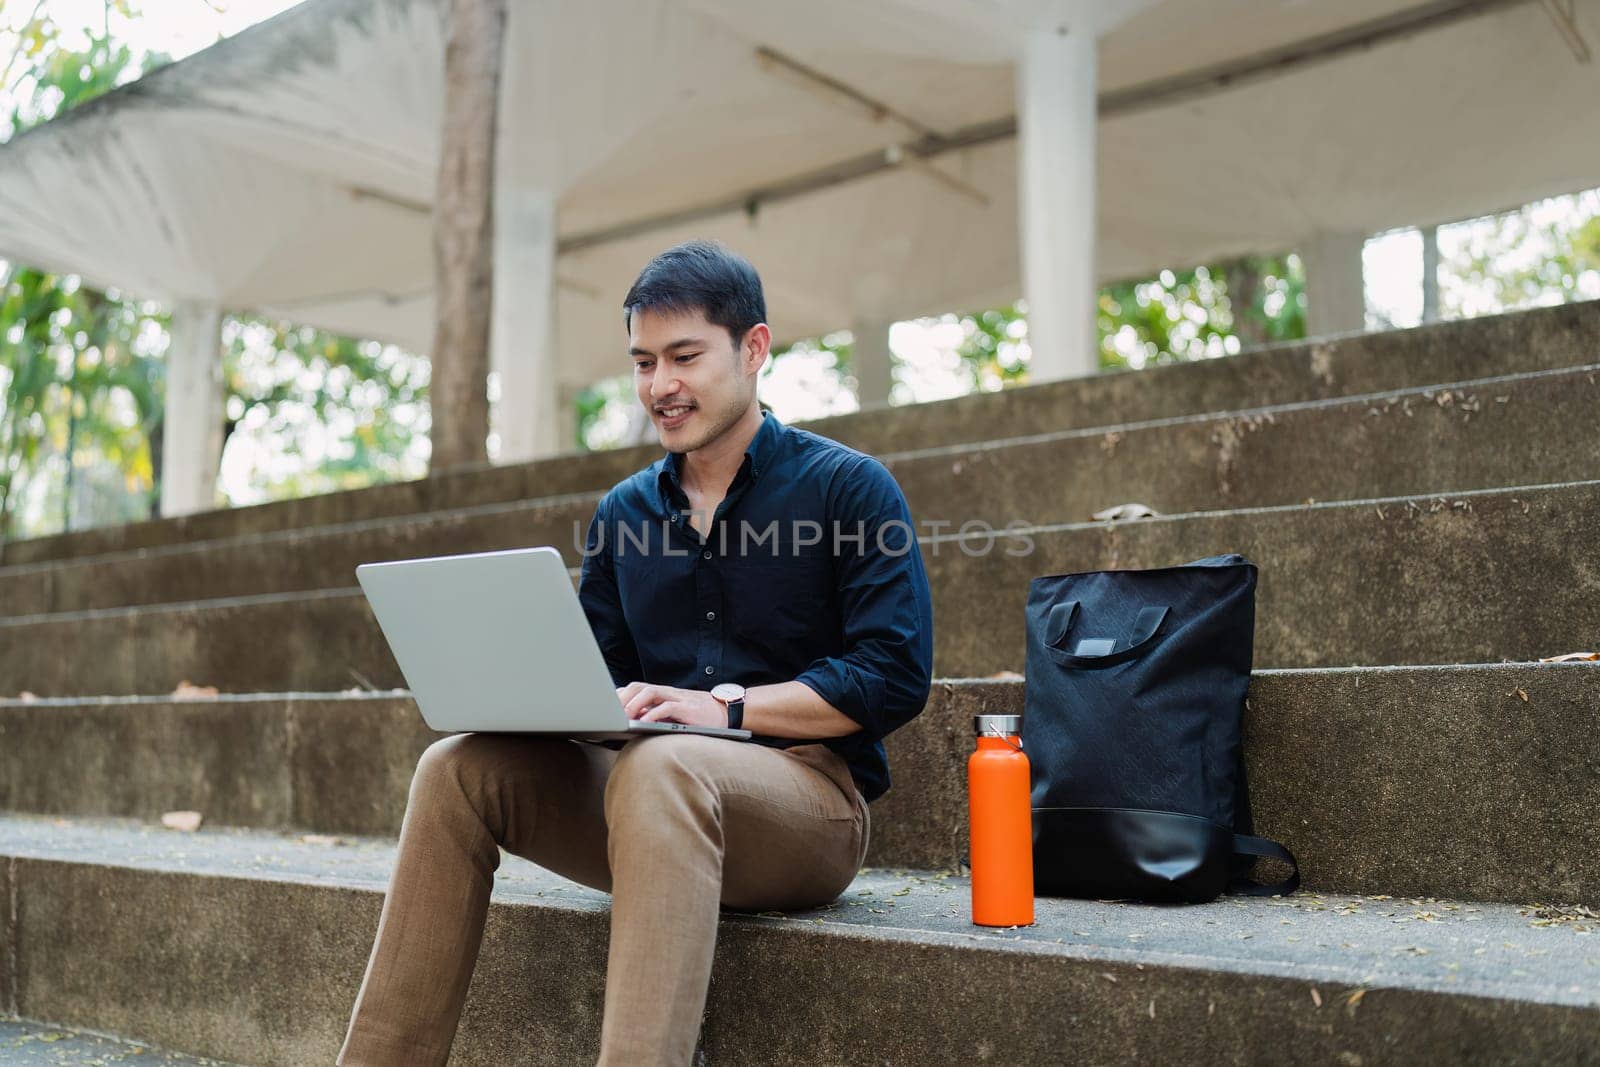 business man sitting on bench and working remotely on project with laptop by itchaznong